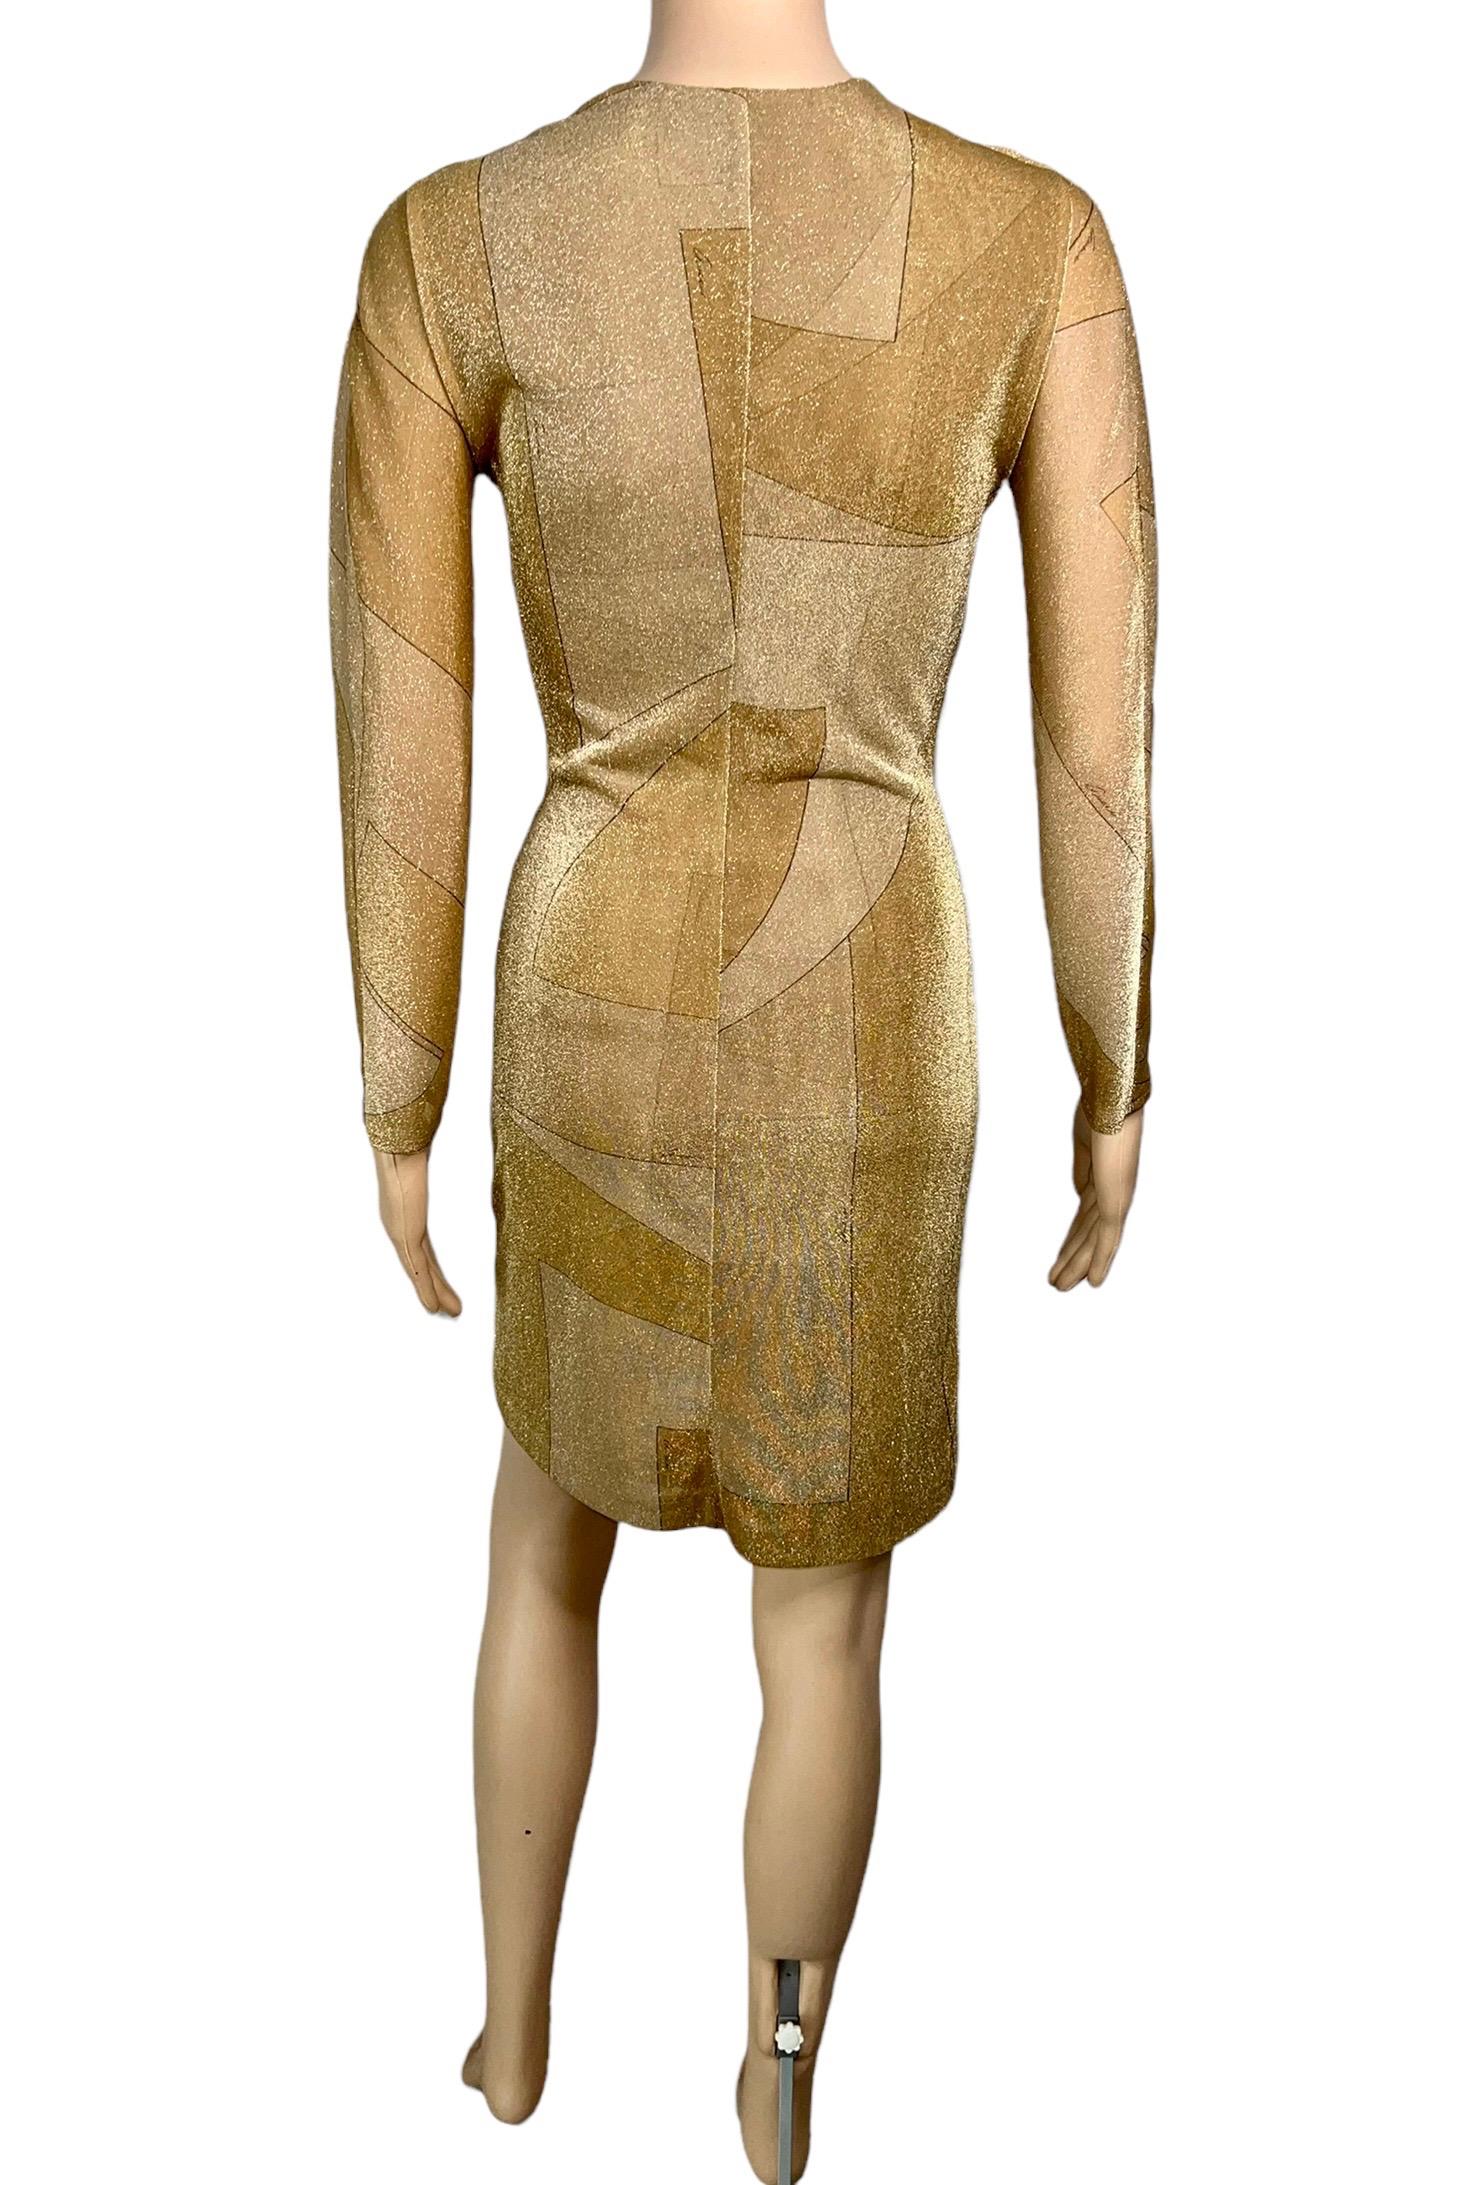 Brown Tom Ford for Gucci F/W 2000 Runway Plunged Neckline Metallic Knit Mini Dress For Sale